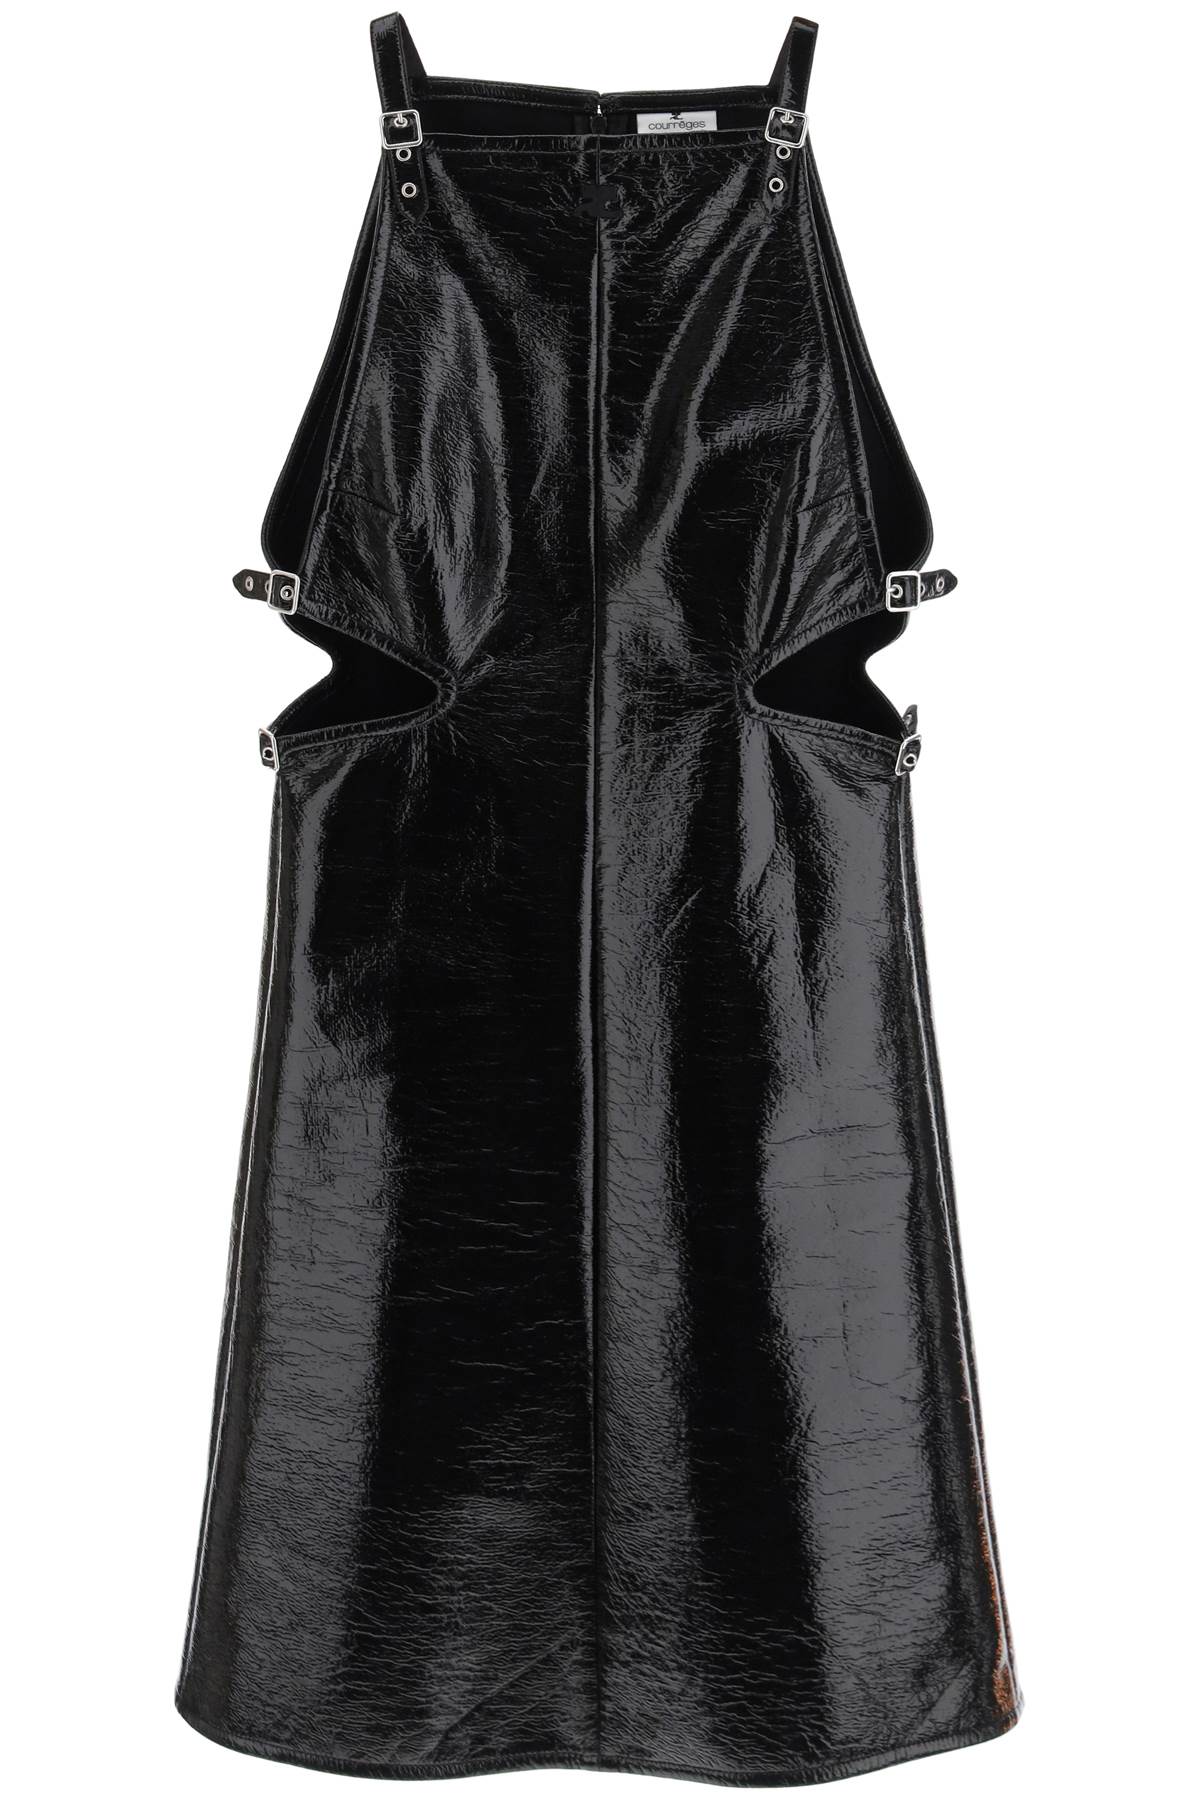 COURREGÈS Bold and Edgy Black Mini Dress for Women